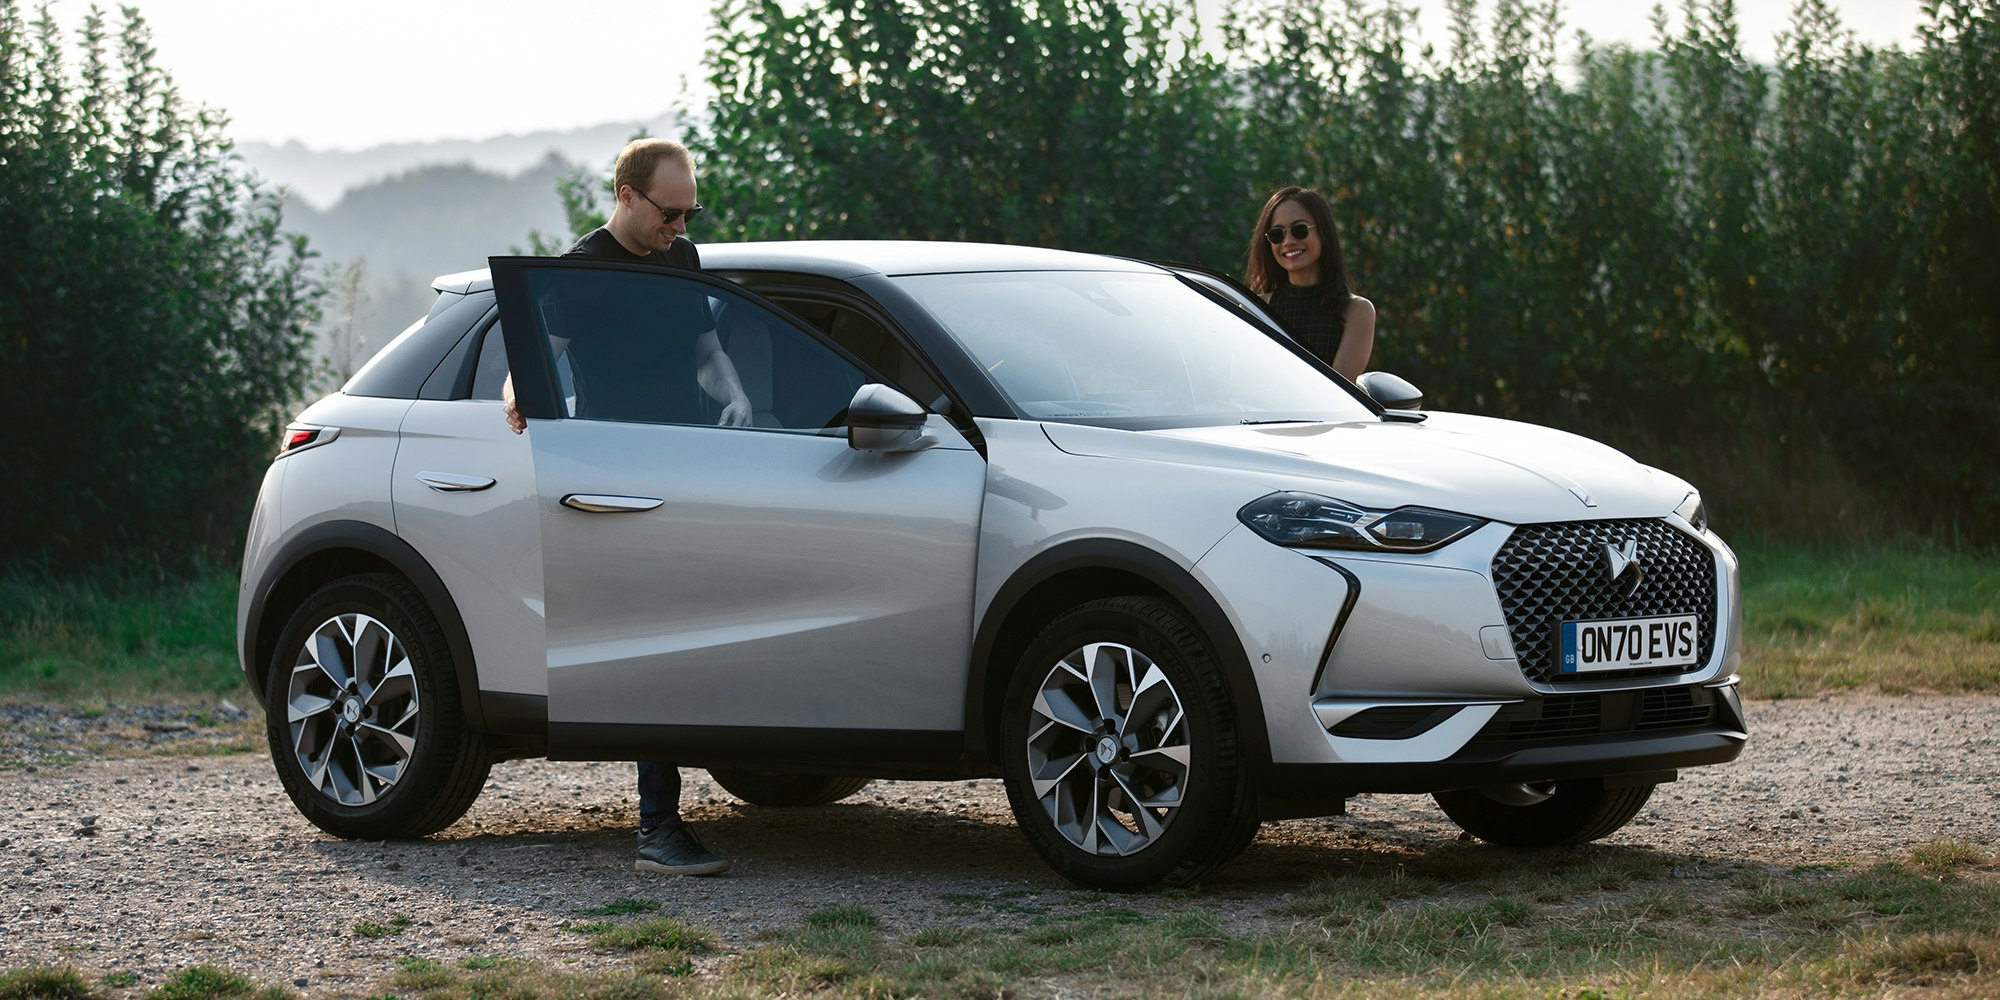 Get a DS3 CROSSBACK E-TENSE ULTRA PRESTIGE Monthly Car Subscription